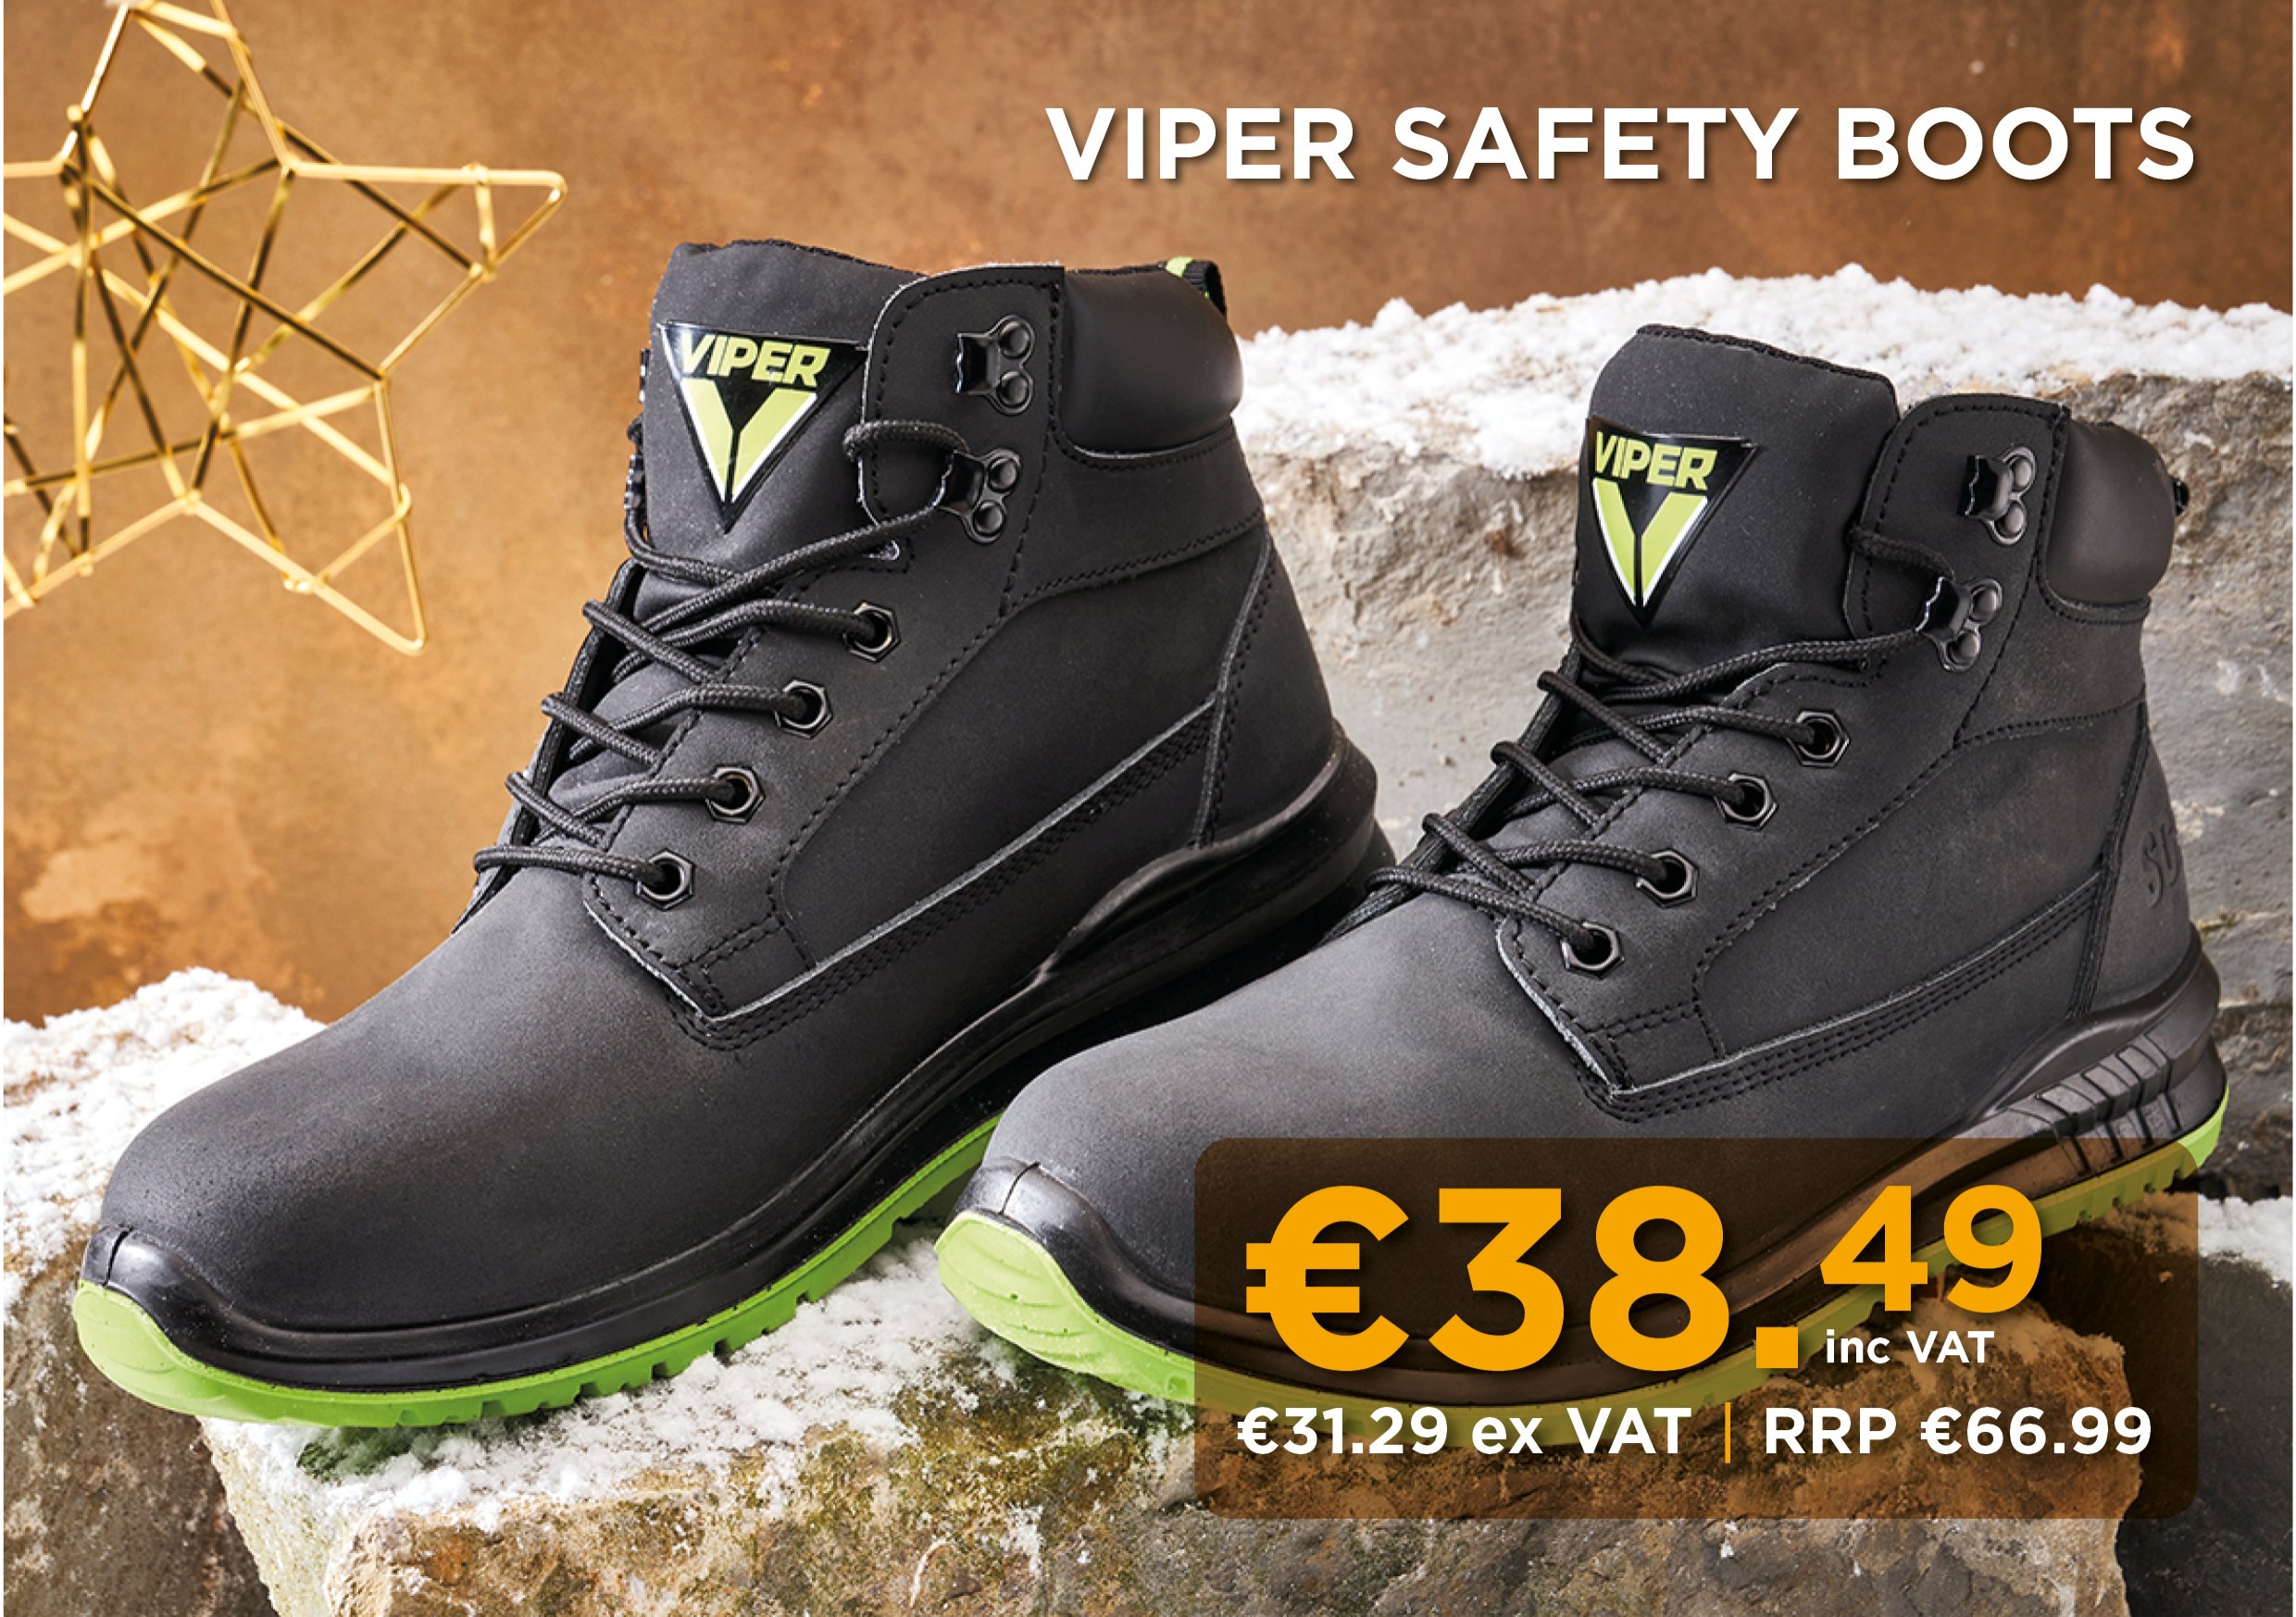 Viper Safety Boots